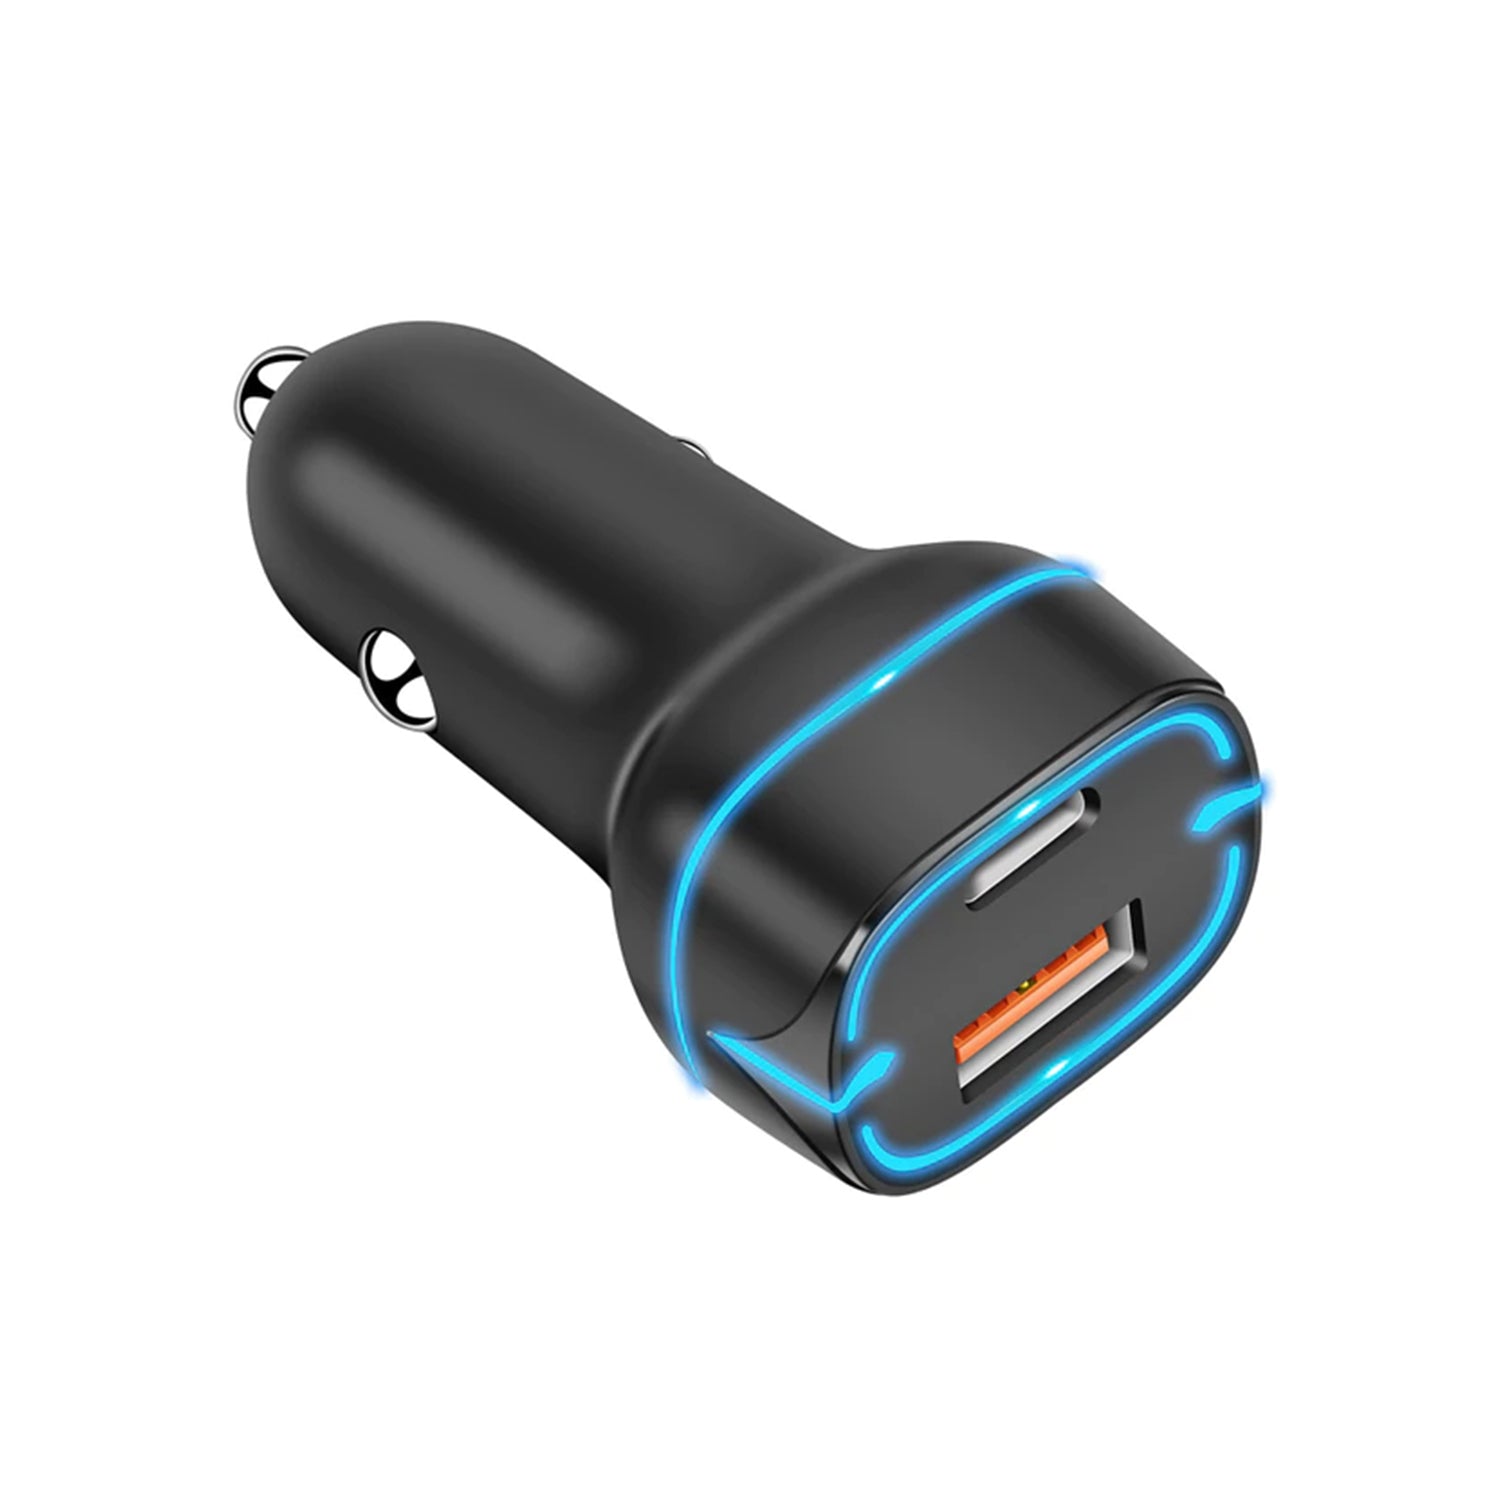 36W Dual Ports (USB3.0+ Type C) Car Adapter for iPhone 13/12/11 and Other Devices - Black